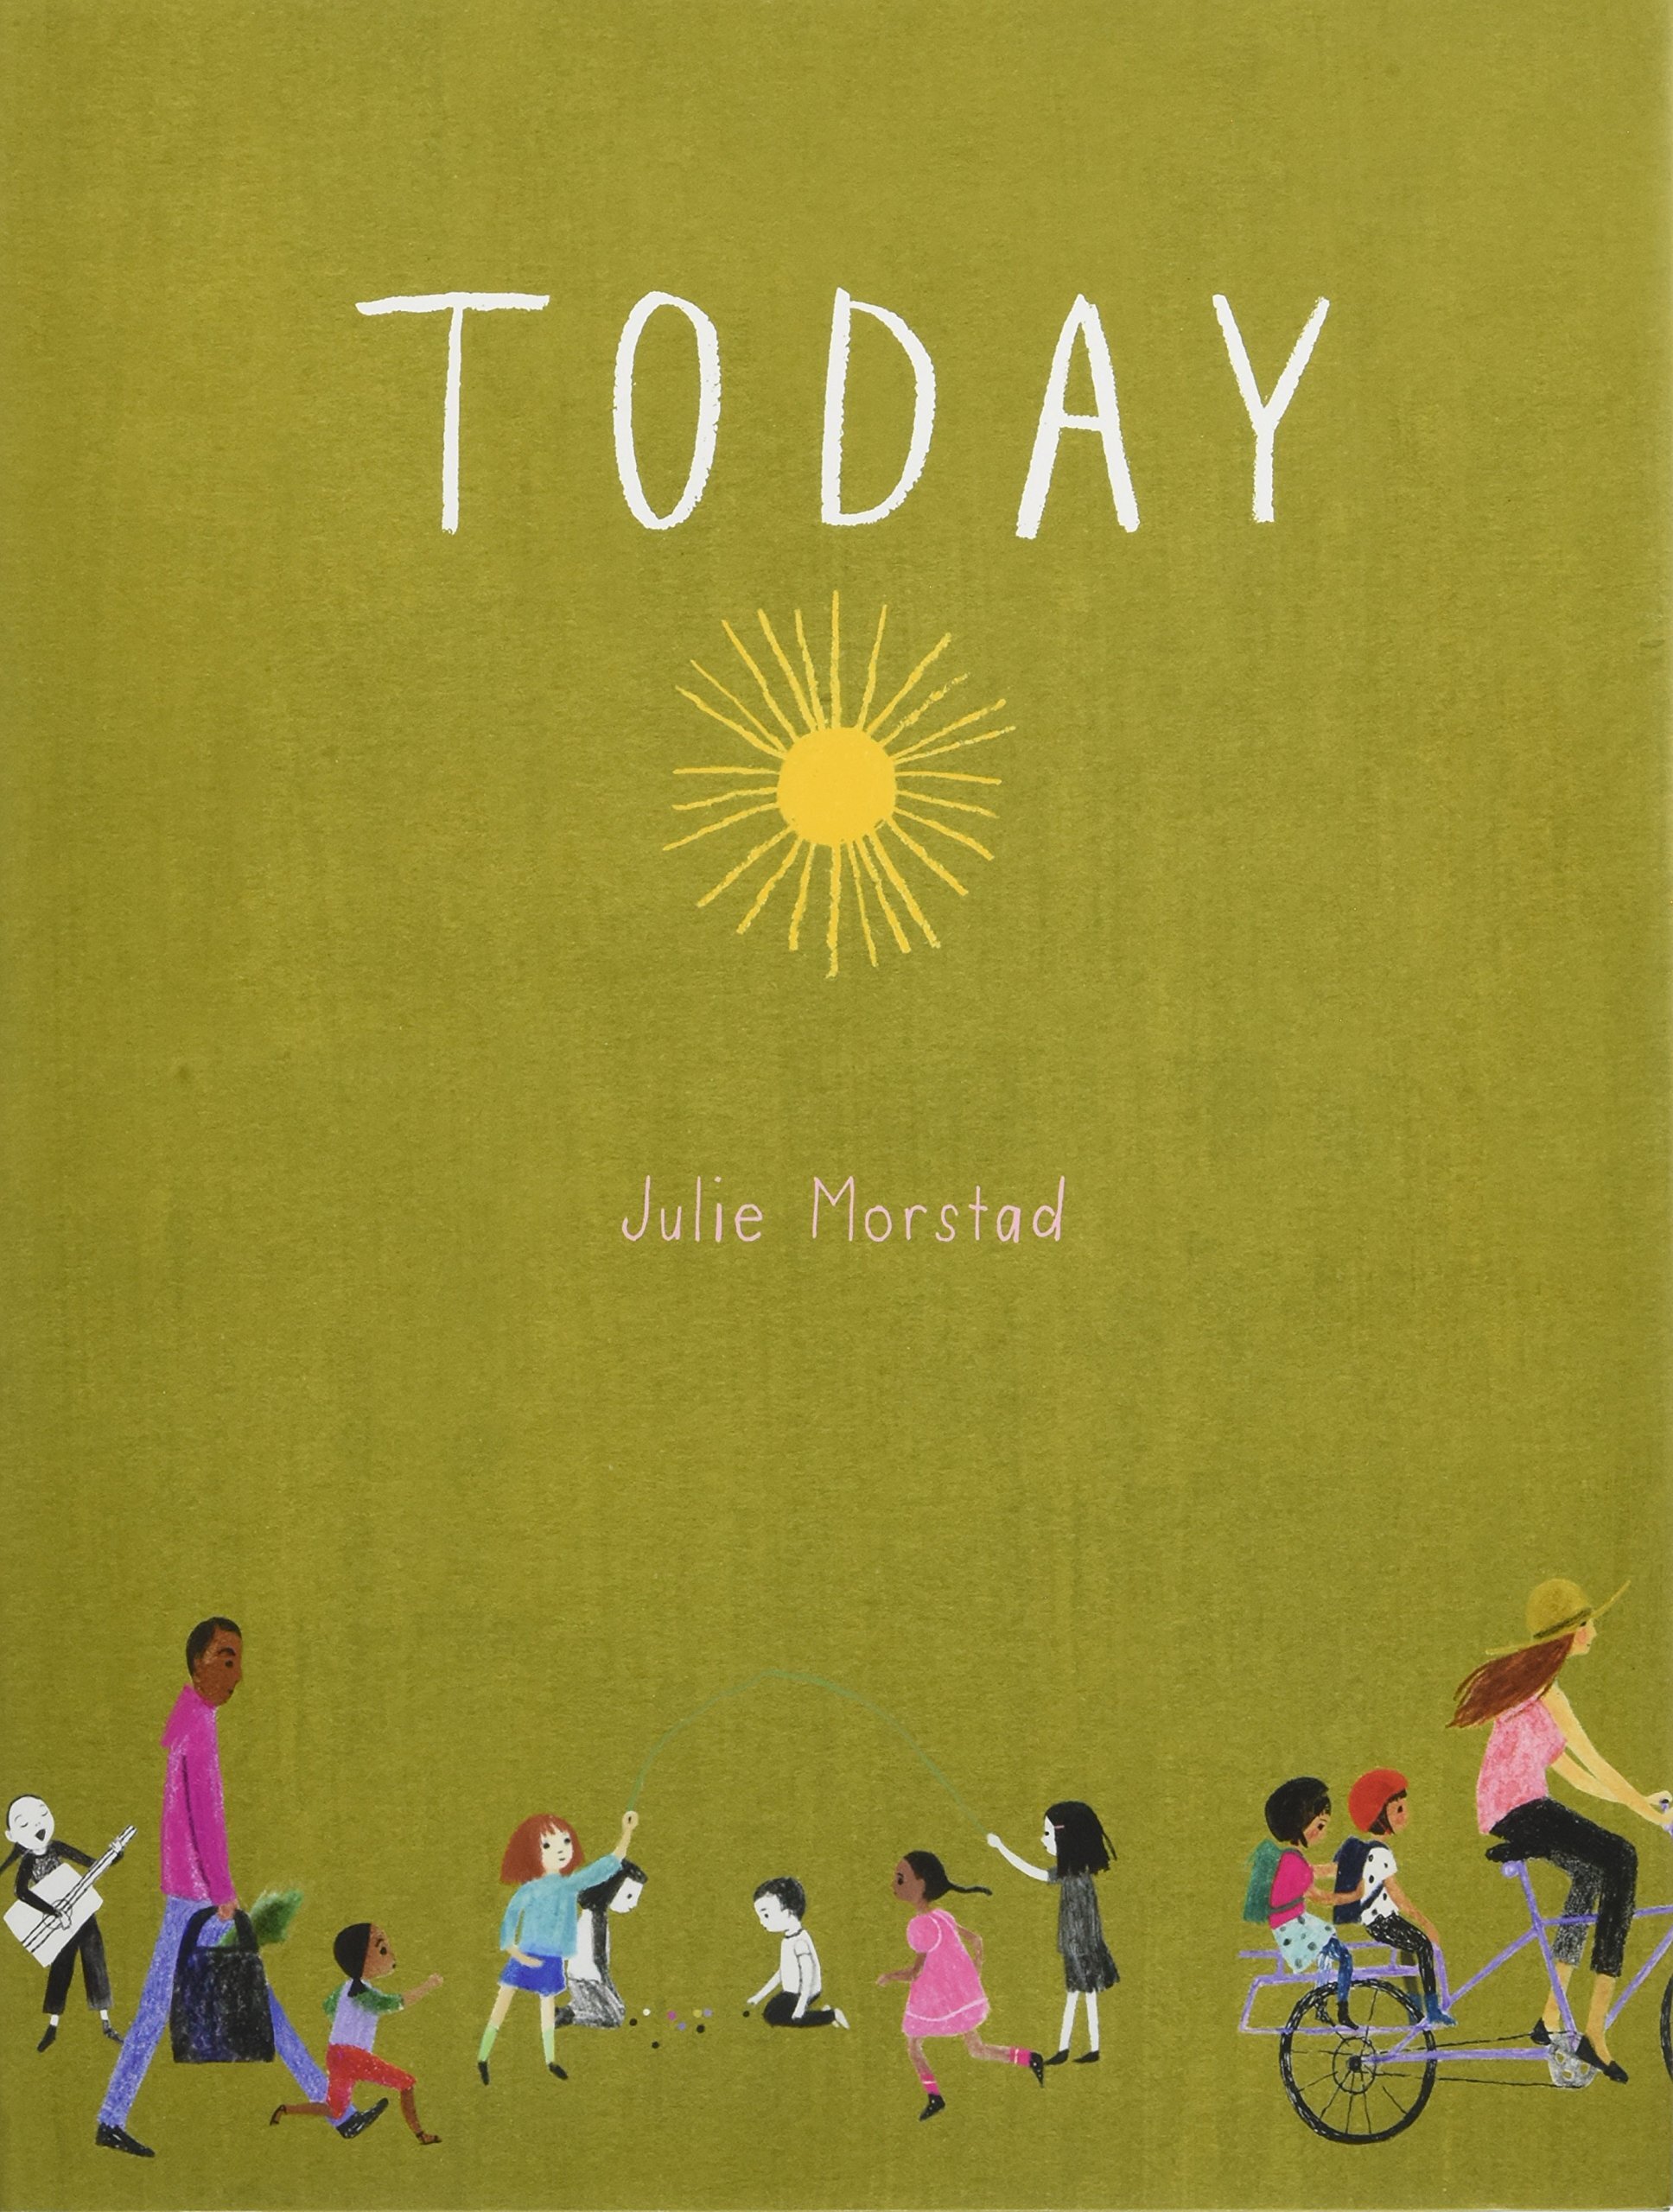 Today is a great book for preschoolers in speech therapy!